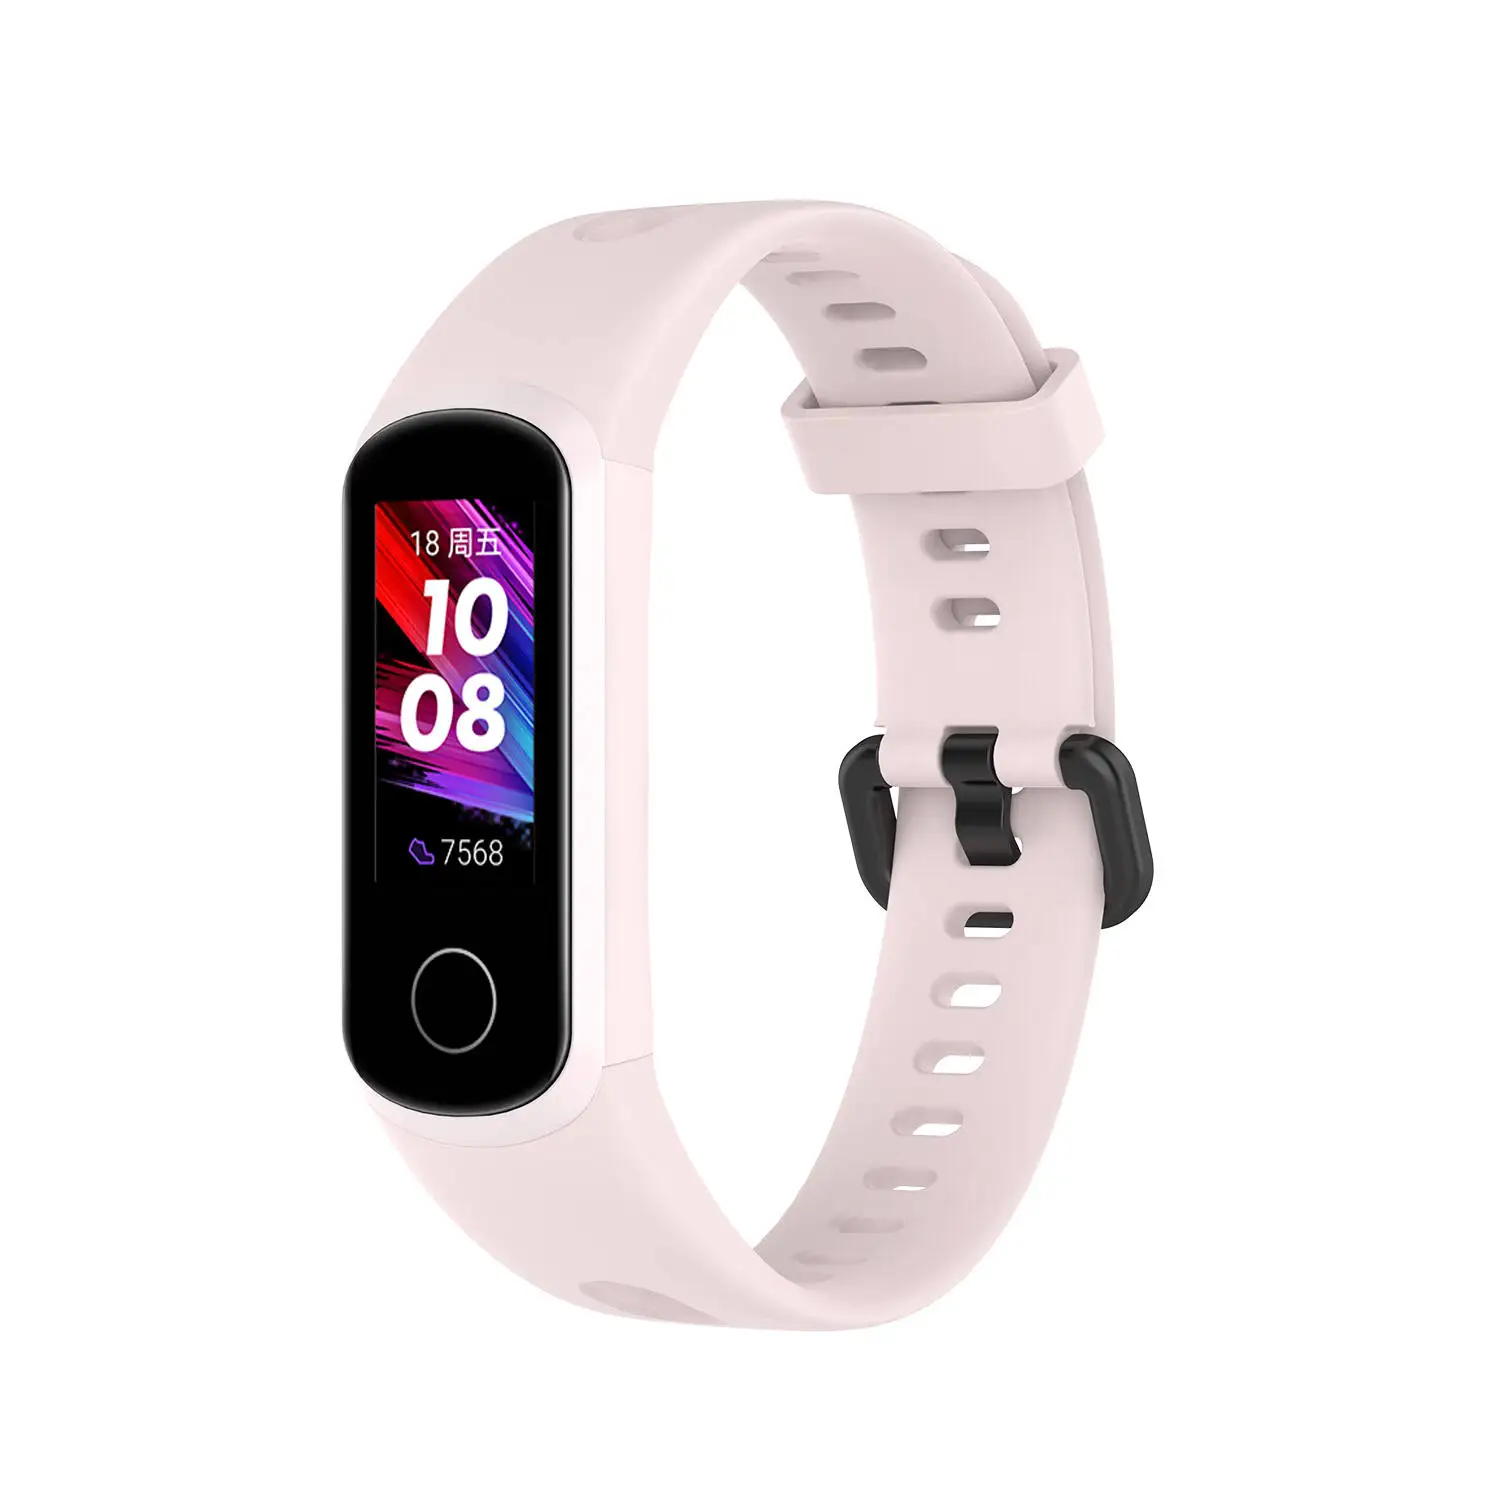 

Colorful Silicone WristStrap For Huawei band 4 / For Huawei Honor band 5i Smart Wristband Sport Bracelet WatchBand Belt Strap